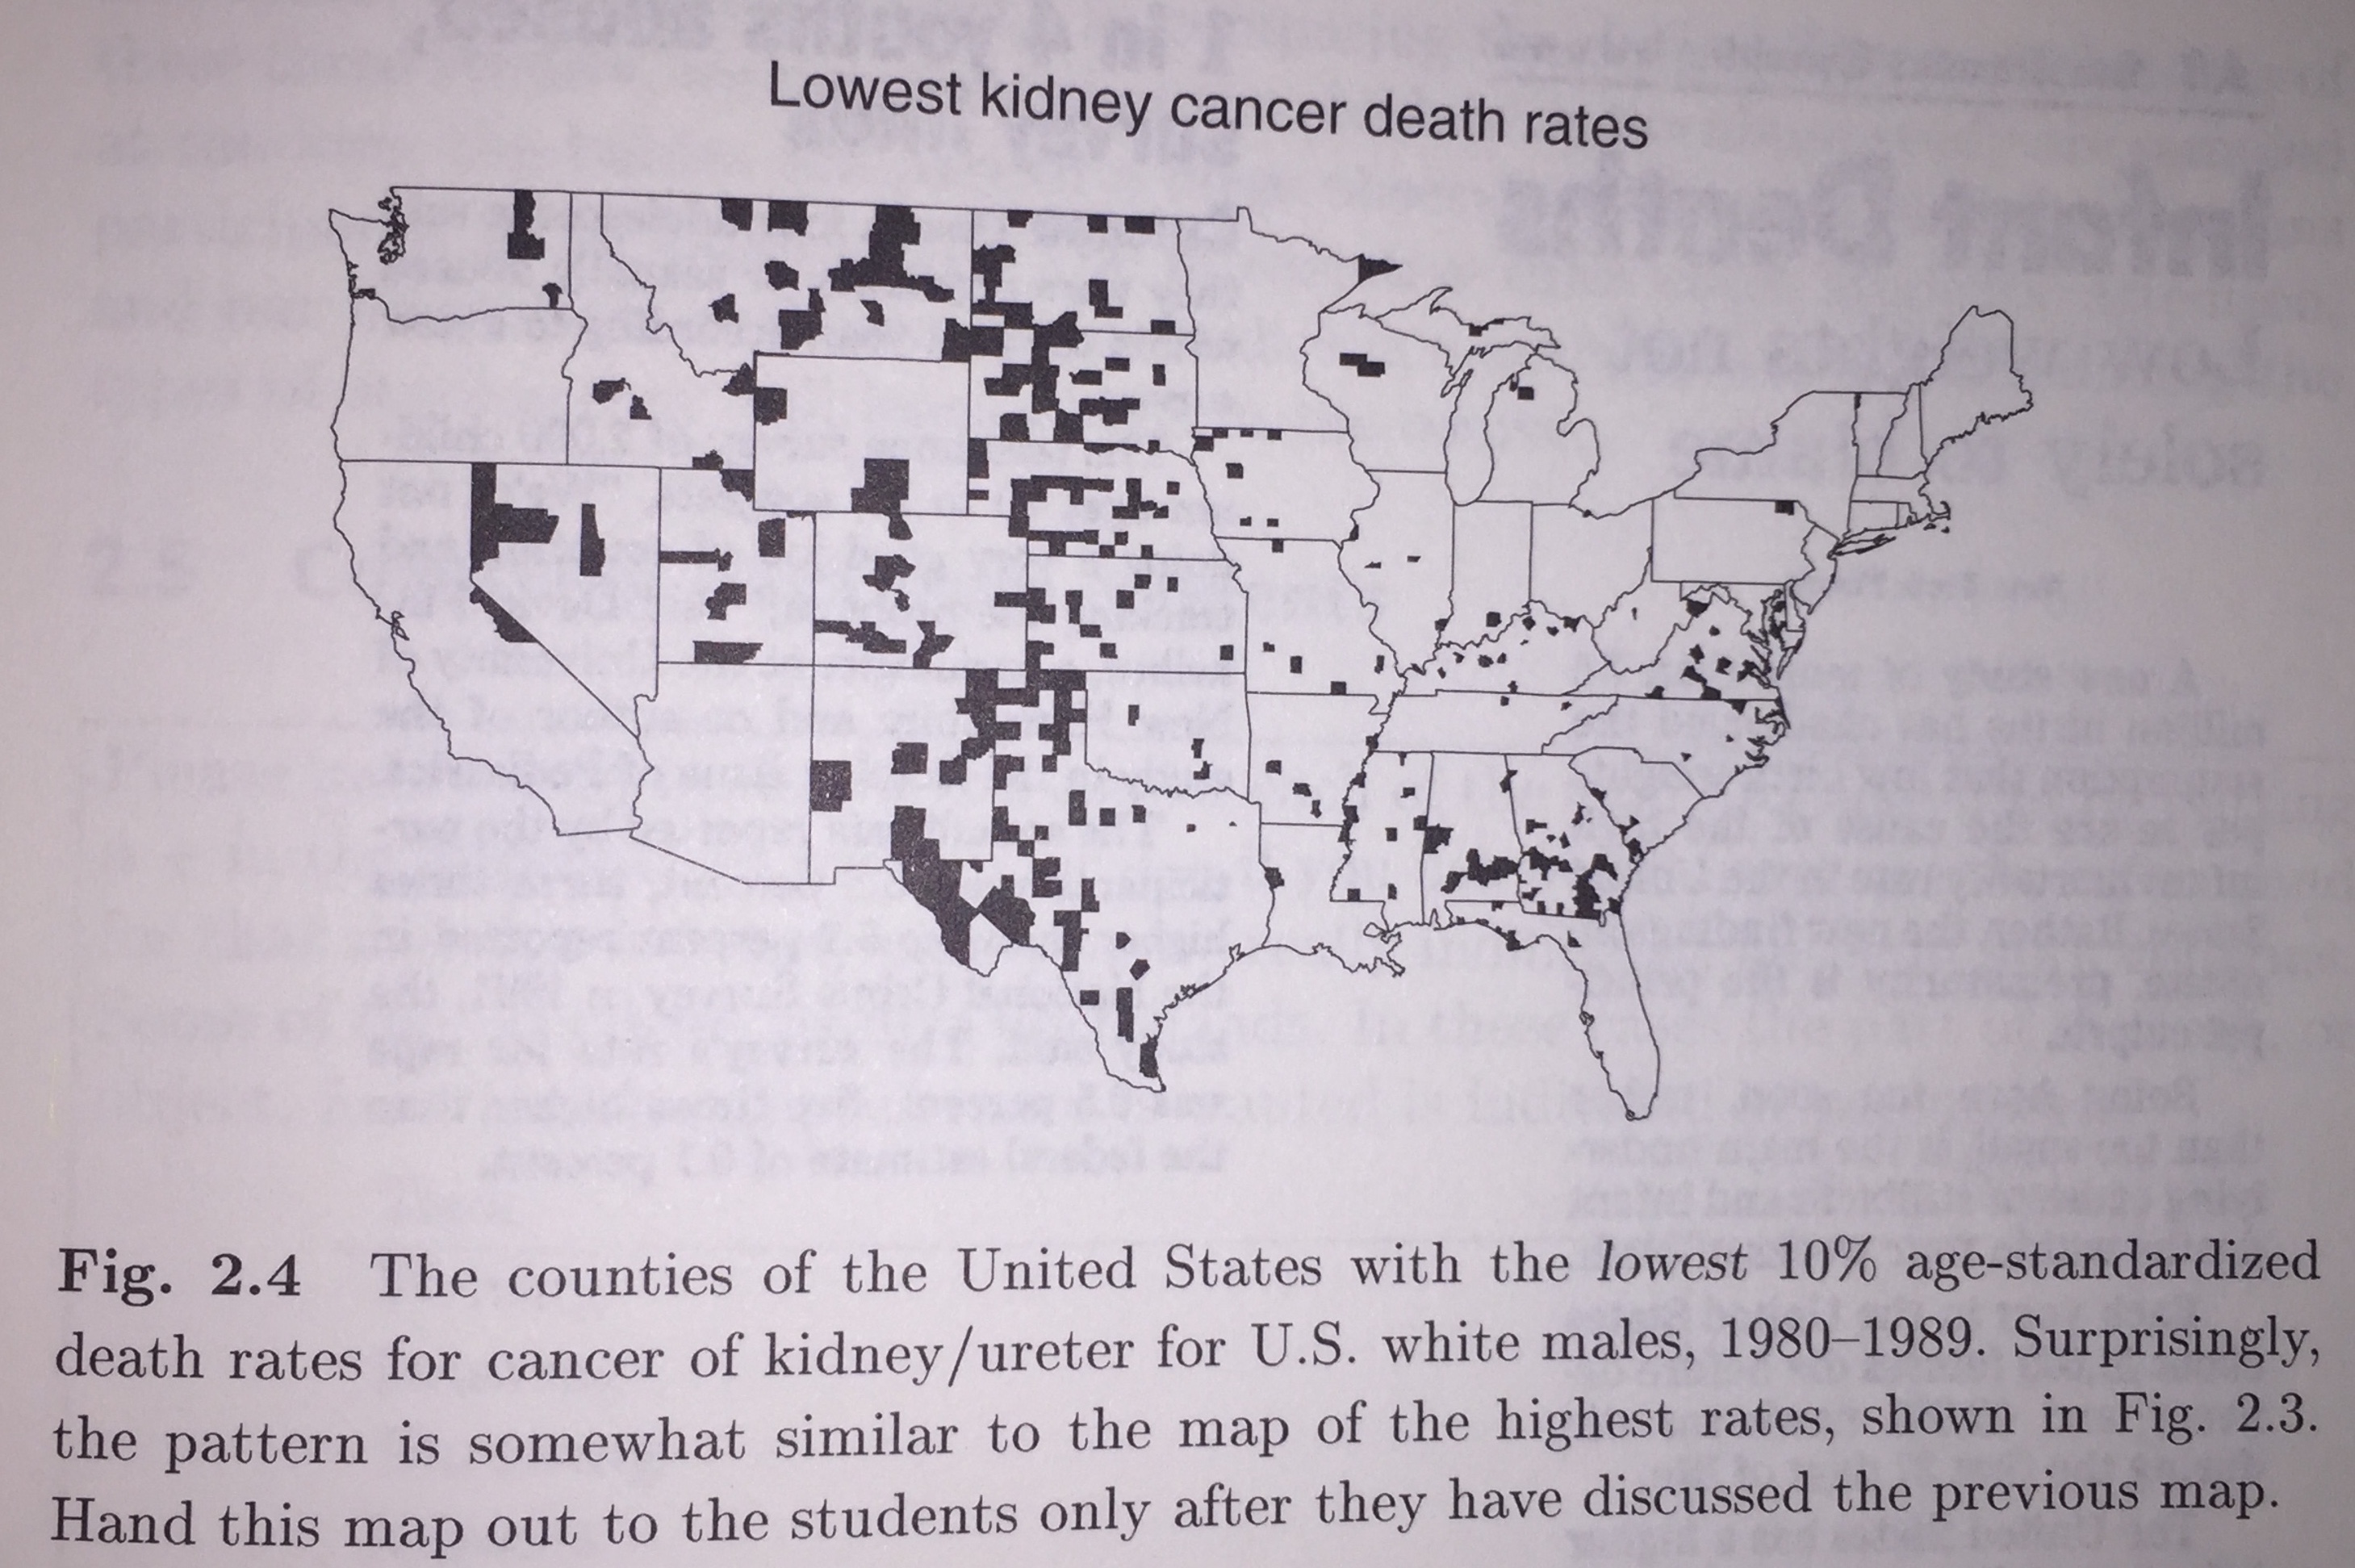 The caption reads: the counties of the United States with the lowest 10% age-standardized death rates for cancer of kidney/ureter for U.S. white males, 1980-1989.  Surprisingly, the pattern is somewhat similar to the map of the highest rates, show in Figure 2.3.